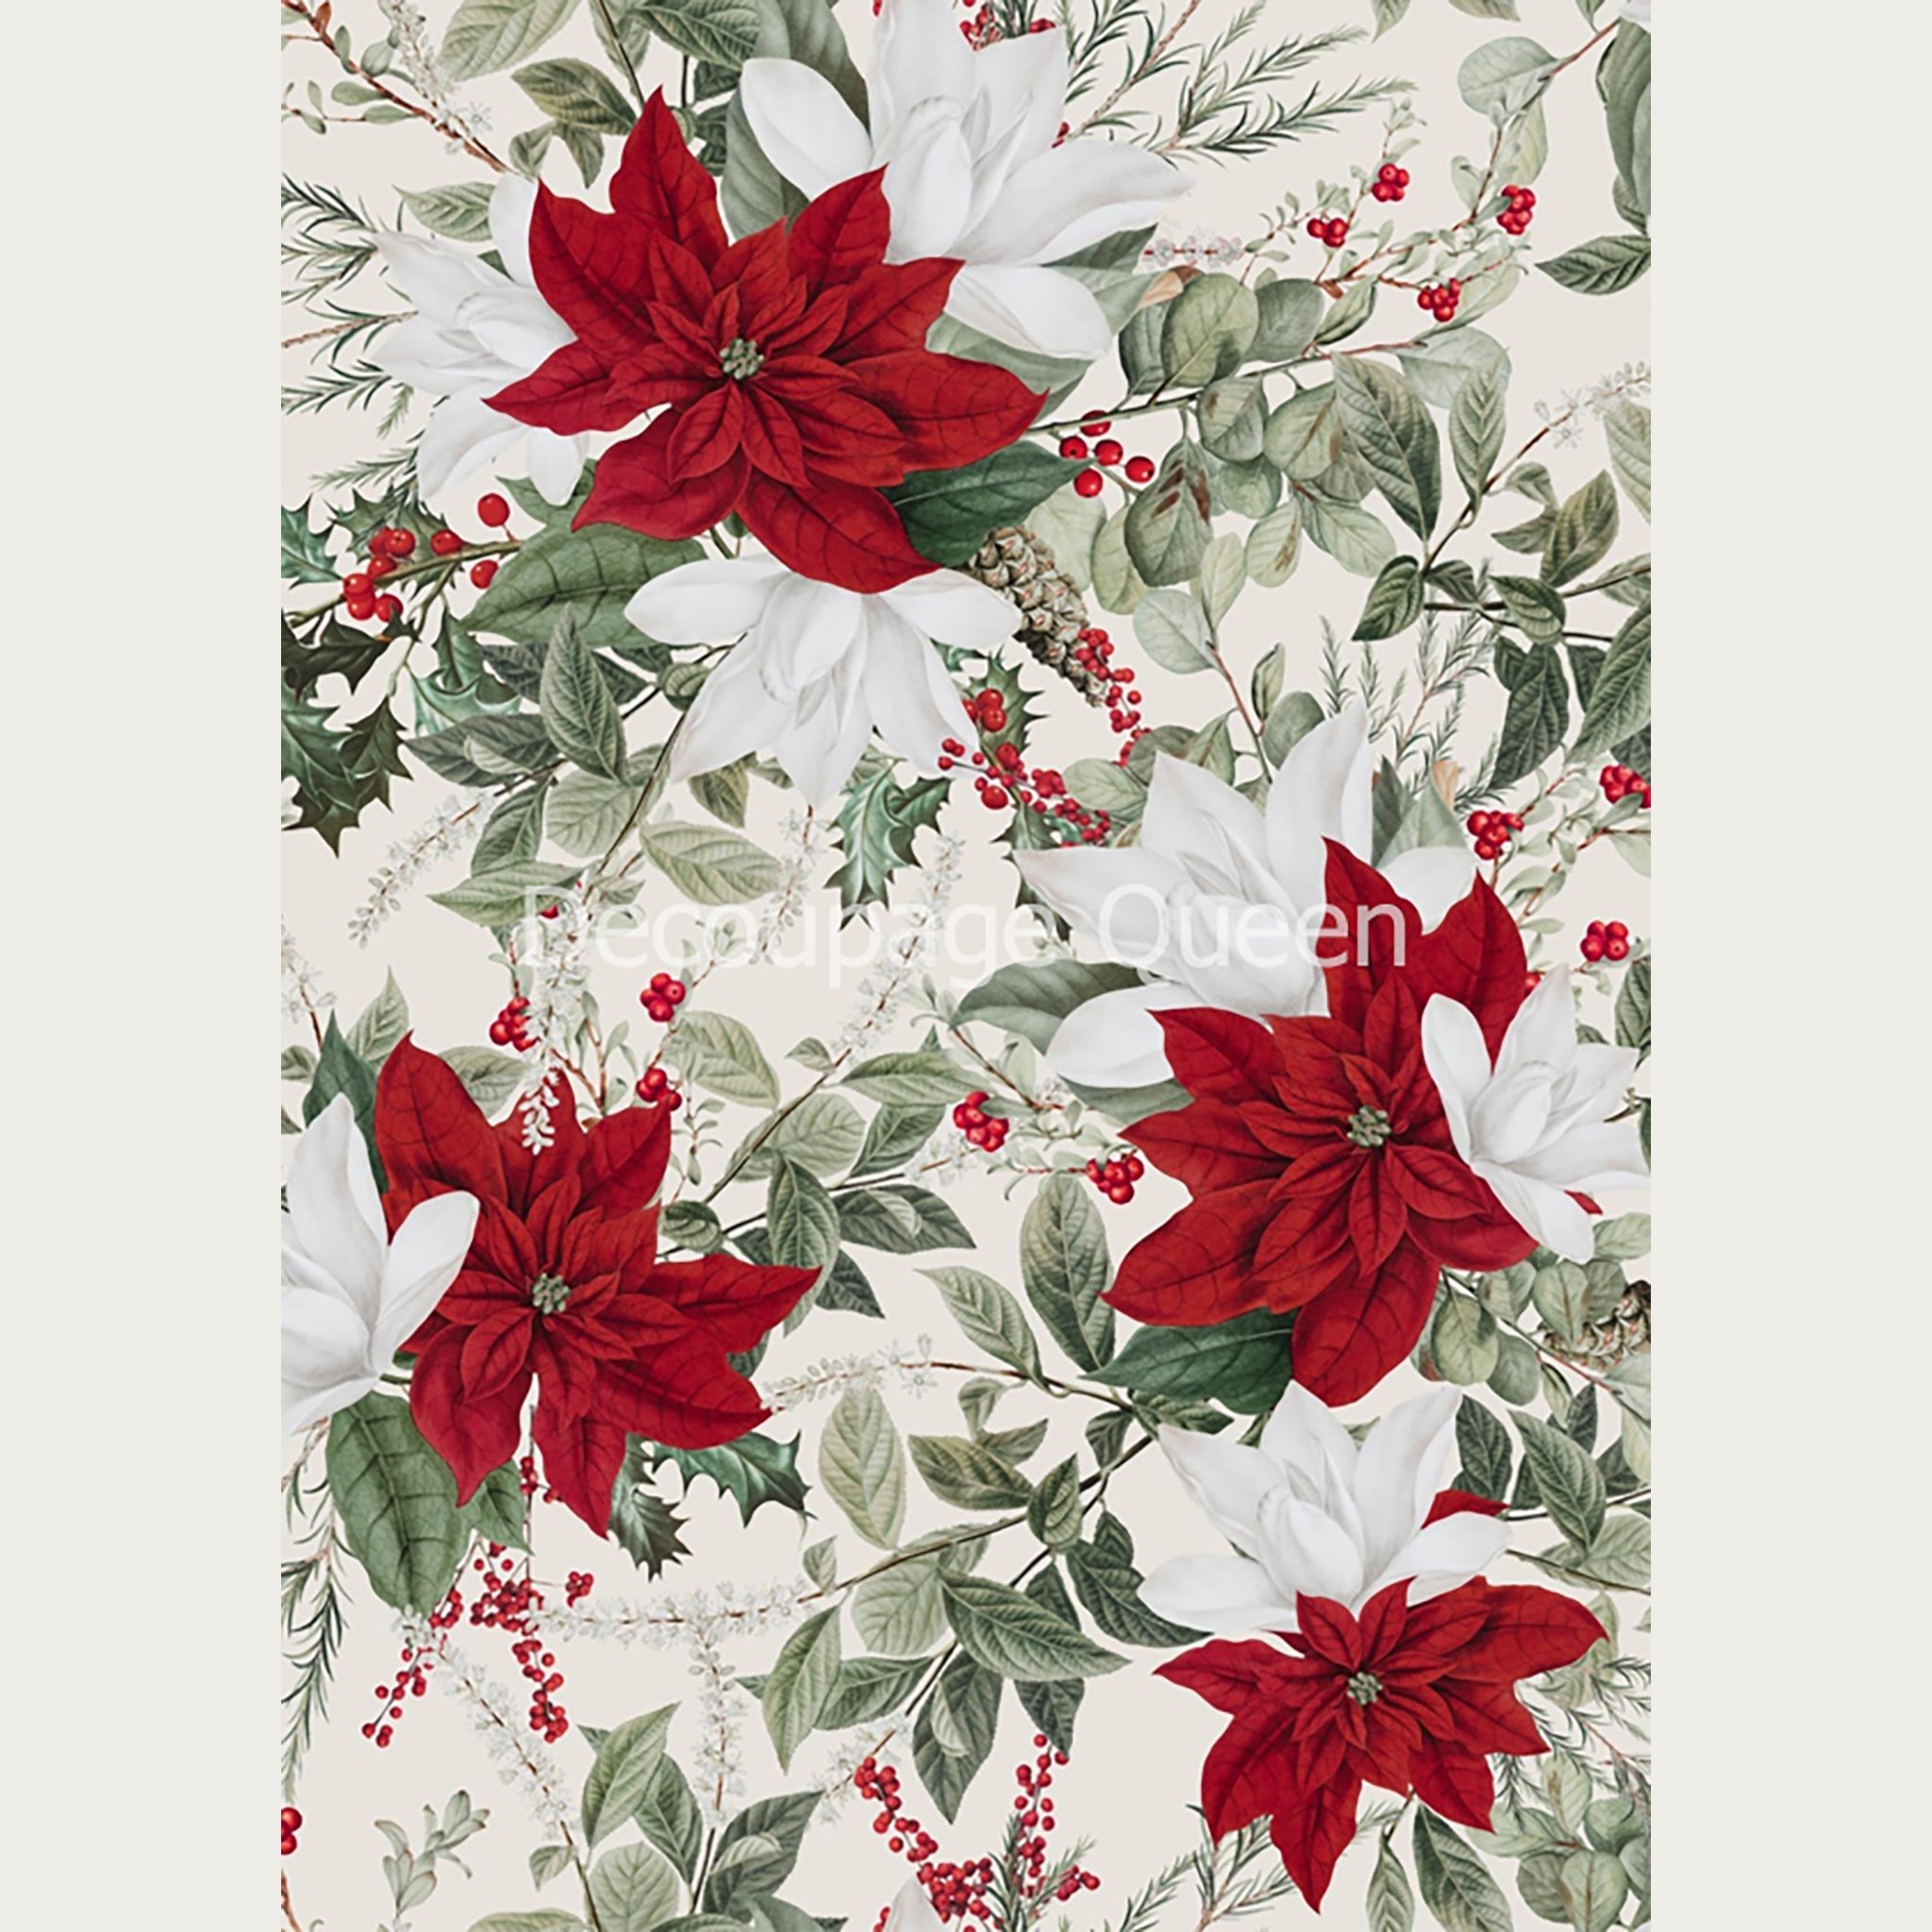 A1 rice paper design of red and white poinsettias with leaves on a vintage white background. White borders are on the sides.